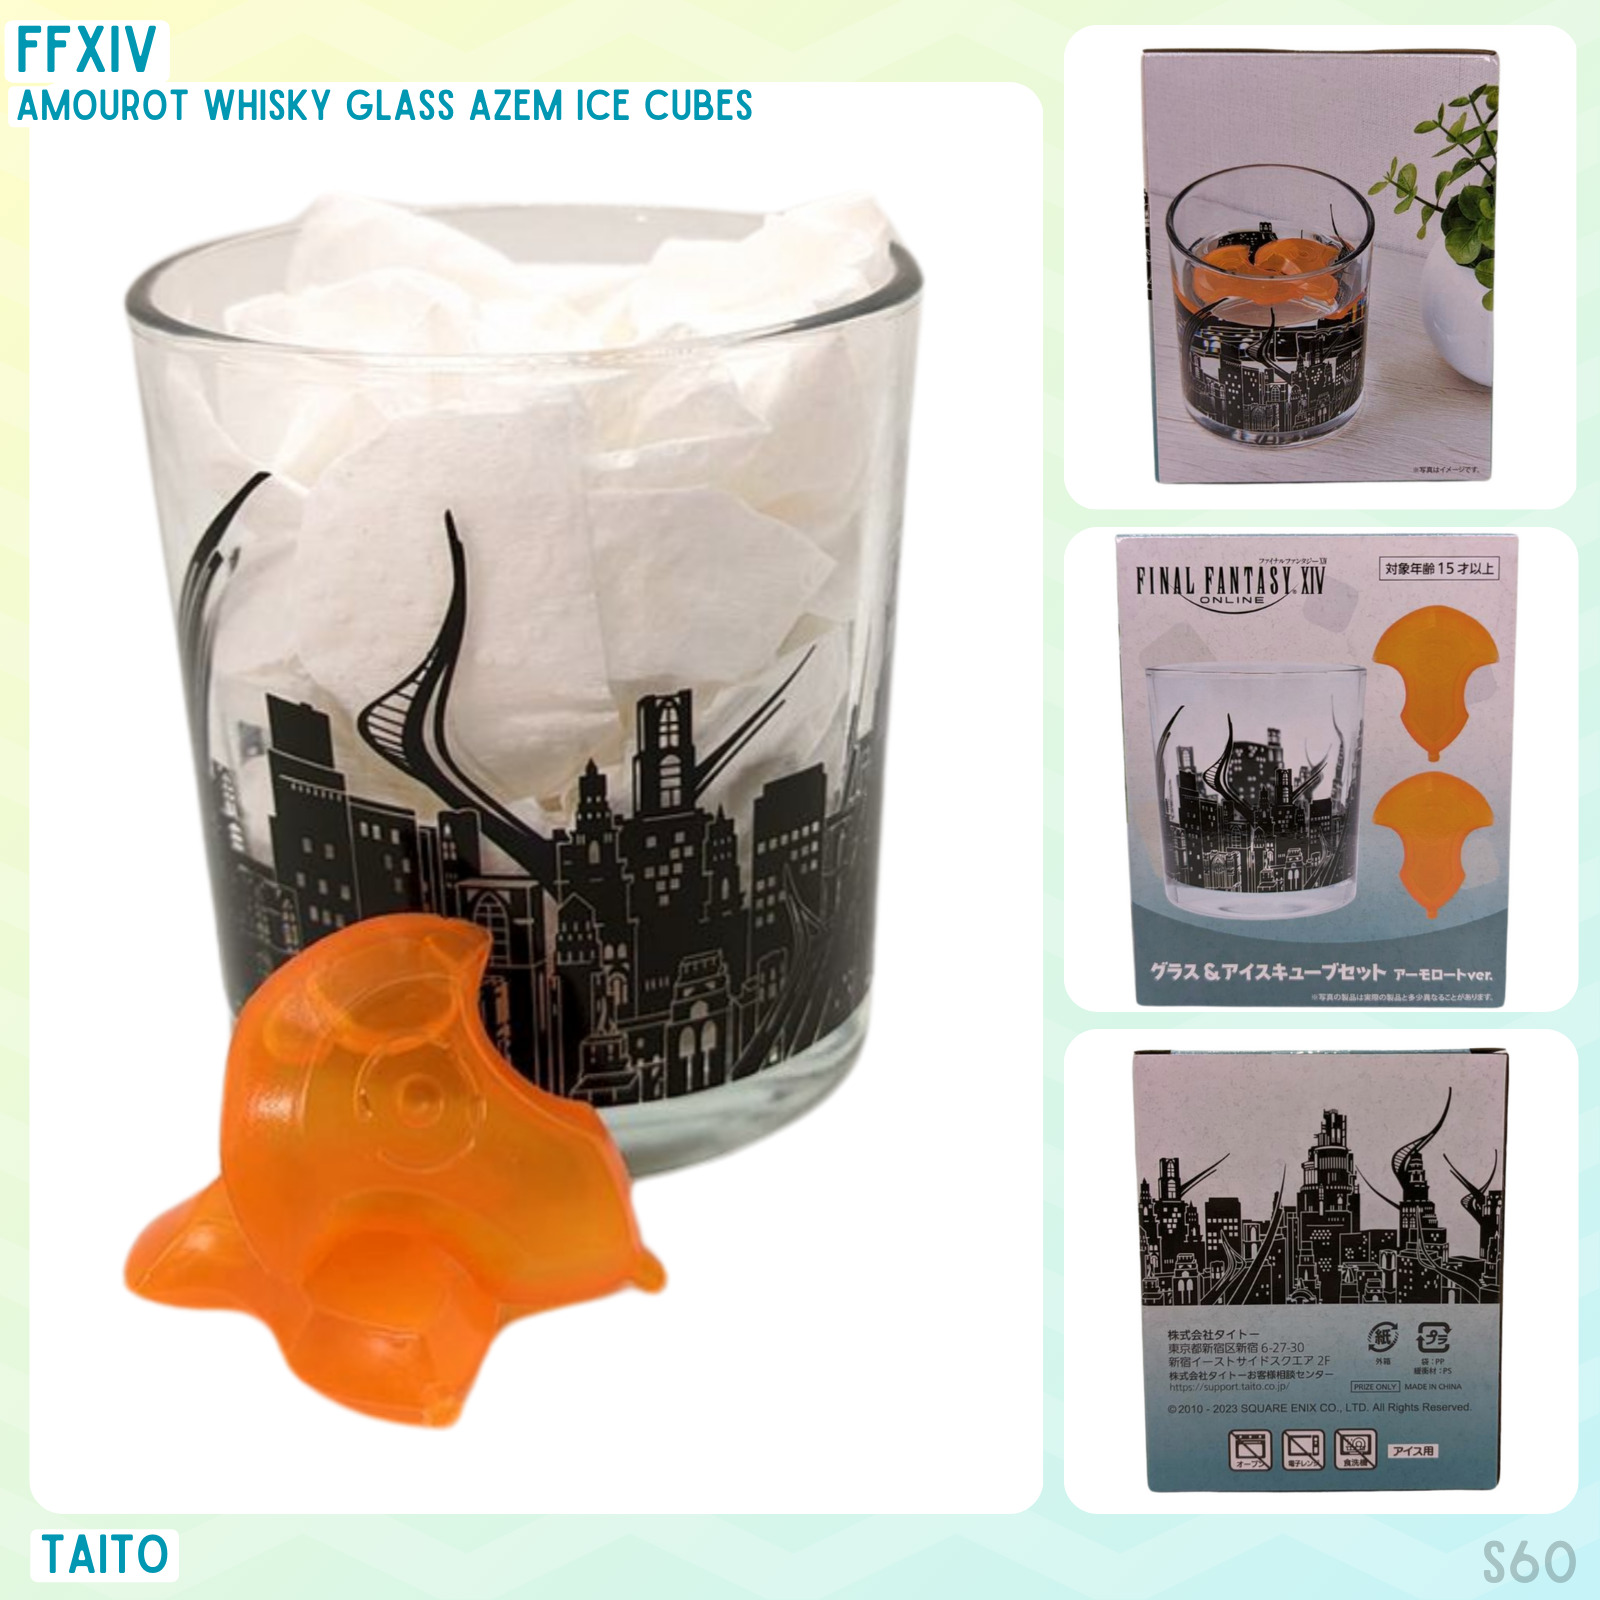 Final Fantasy XIV FFXIV Amourot Whisky Glass Cup & Azem Ice Cubes 